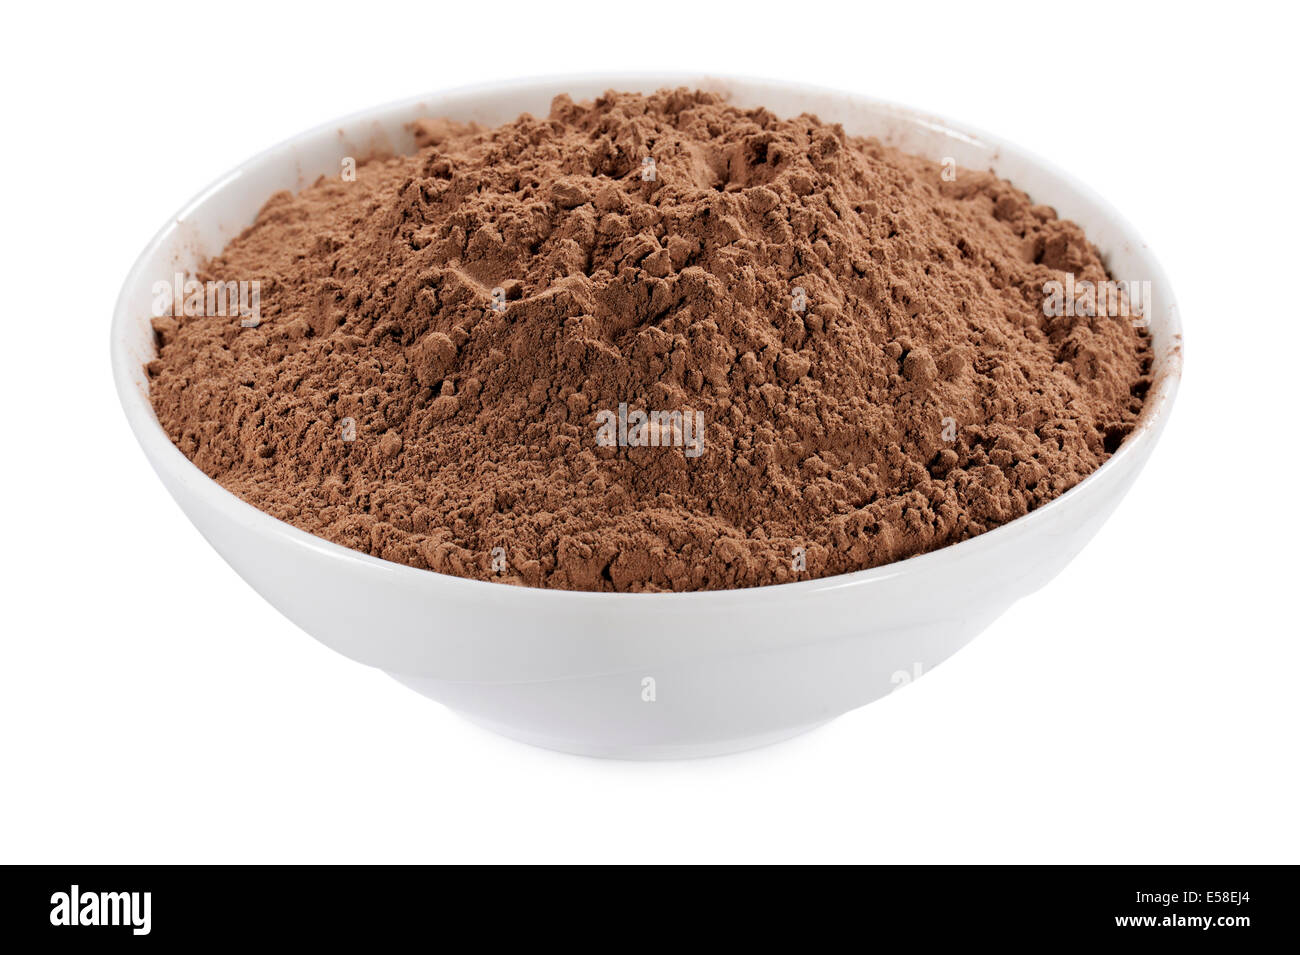 Poudre de cacao, isolated on white Banque D'Images